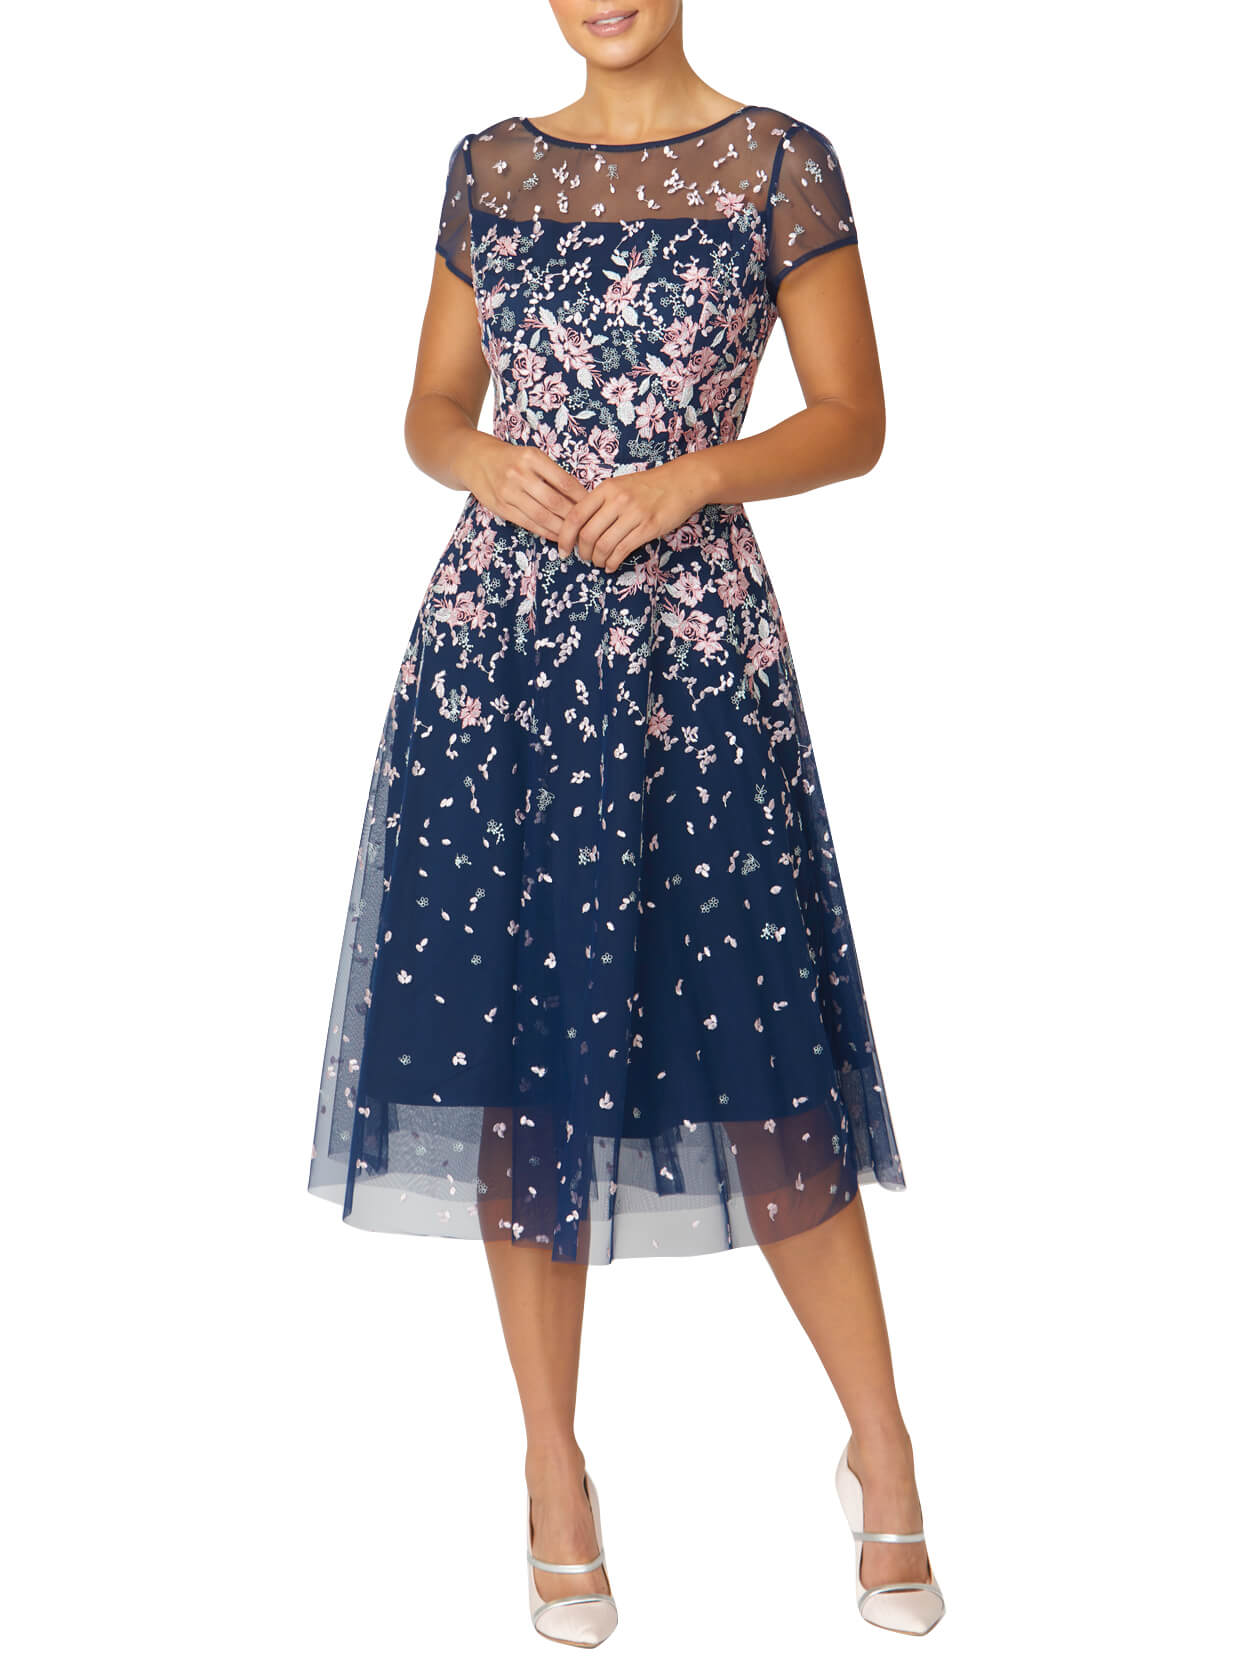 Event Dresses | Special Occasion | Party Dresses